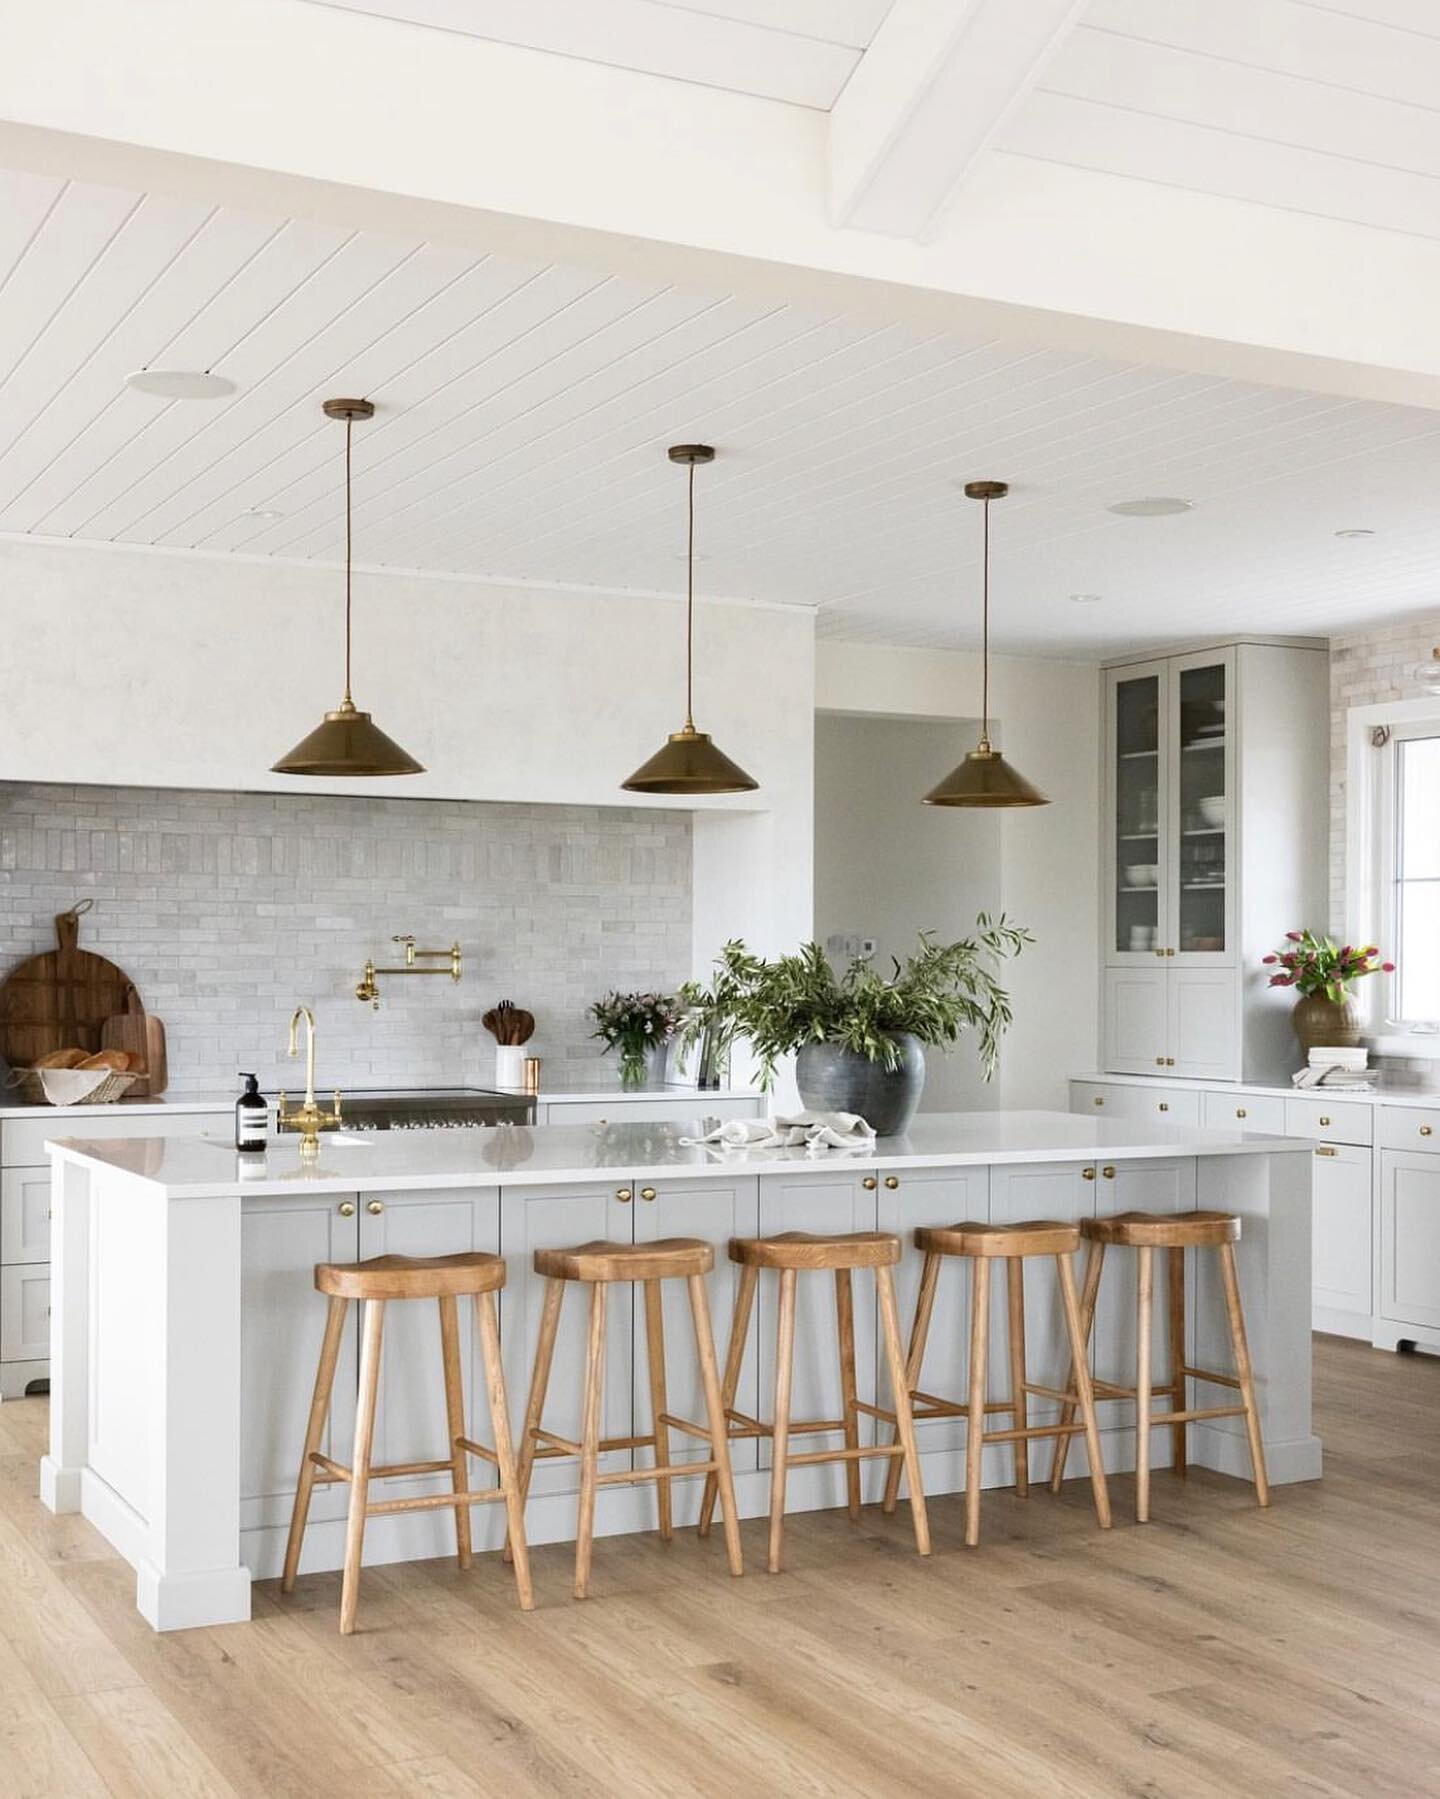 How dreamy is this kitchen by @maison.blonde ?! ✨

We&rsquo;re OBSESSED with the whole look, especially the backsplash, pendant lights and that shiplap ceiling 👀

#inspo #inspiration #kitcheninspo #kitcheninspiration #kitchendesign #kitchenremodel #